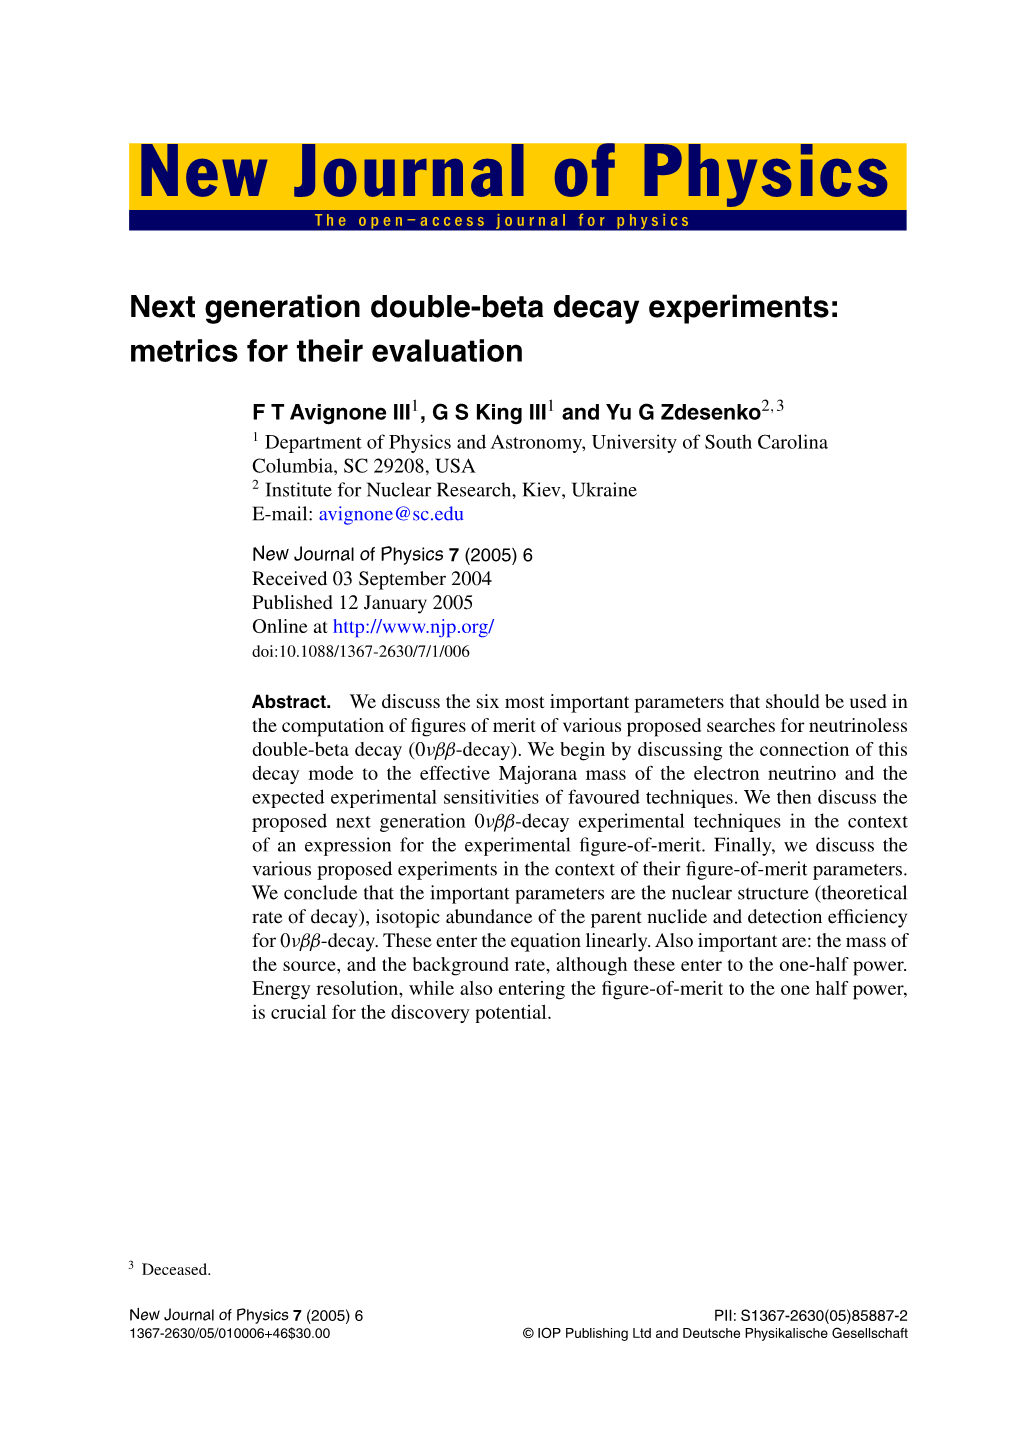 Next Generation Double-Beta Decay Experiments: Metrics for Their Evaluation